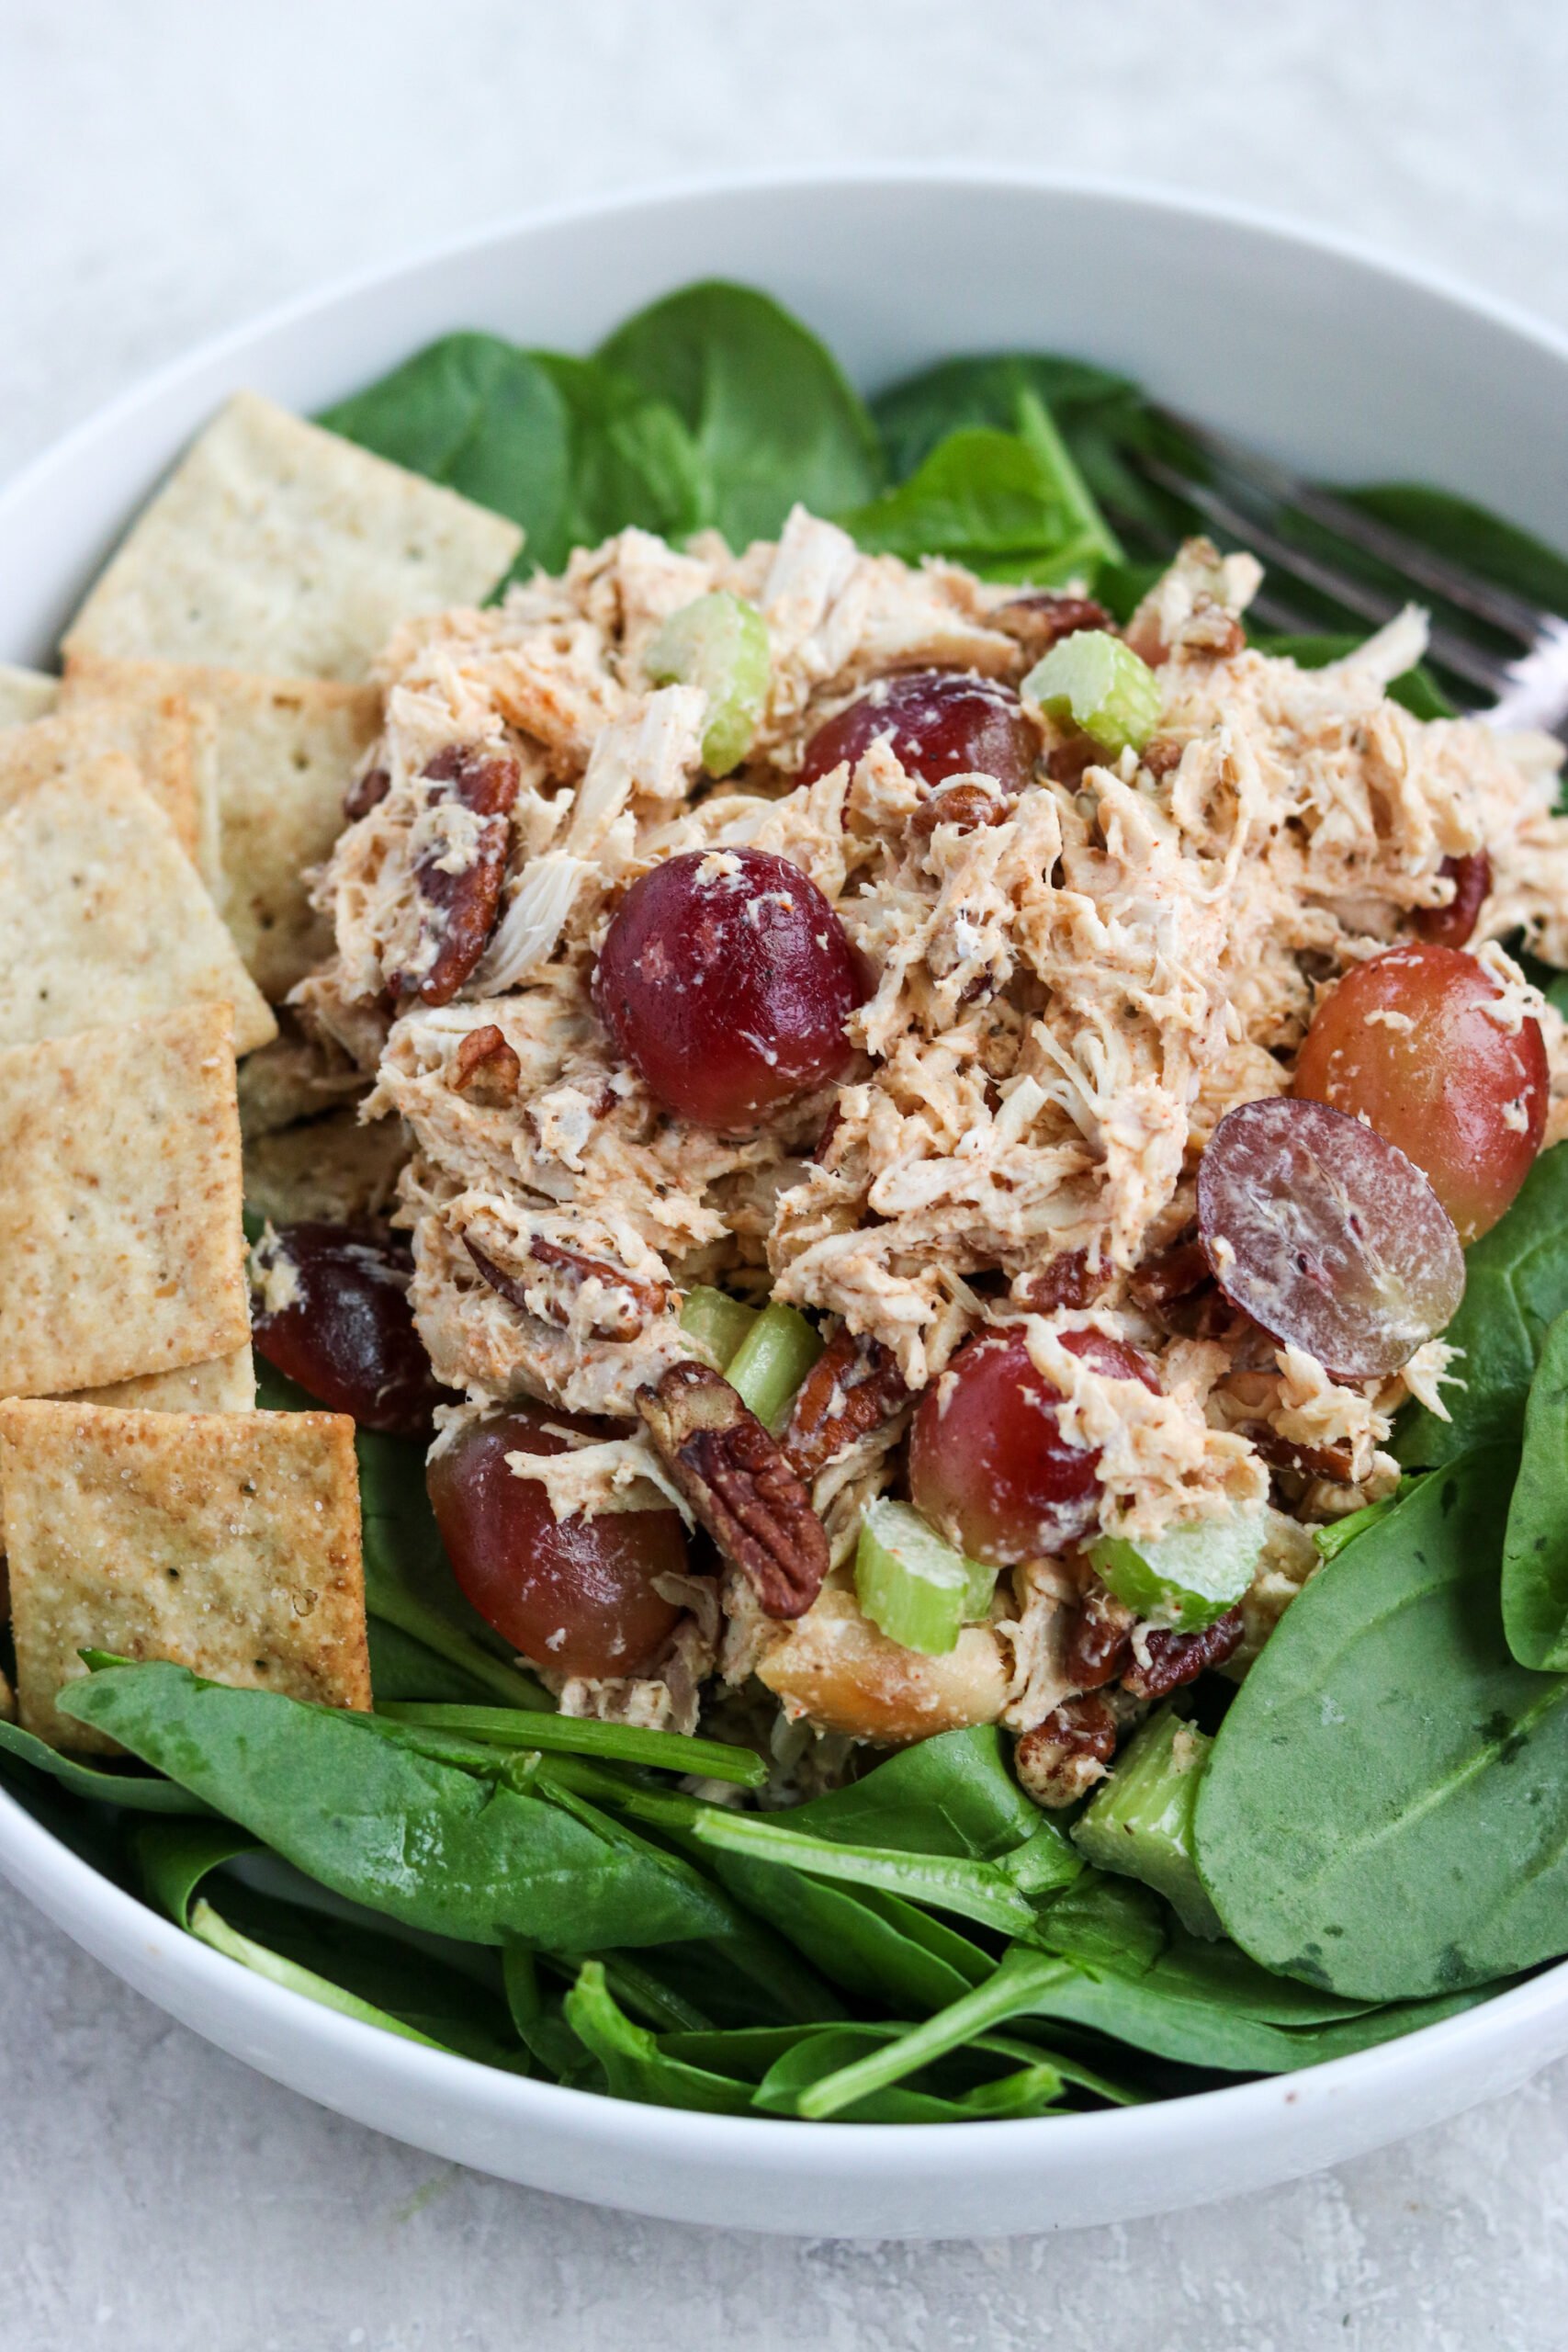 healthy chicken salad with grapes, pecans, and celery on lettuce with grain free crackers